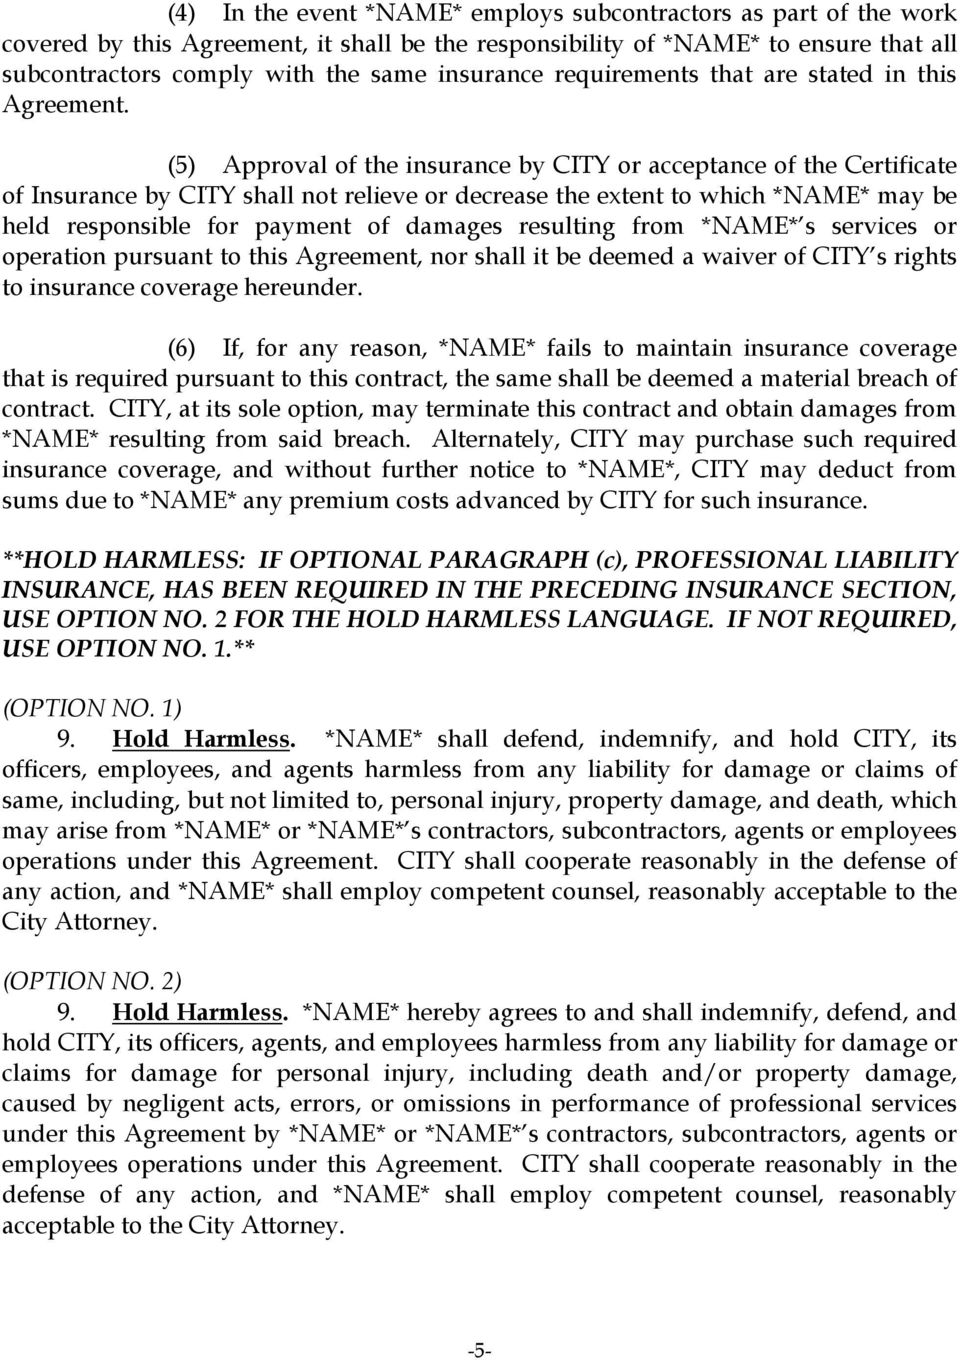 (5) Approval of the insurance by CITY or acceptance of the Certificate of Insurance by CITY shall not relieve or decrease the extent to which *NAME* may be held responsible for payment of damages